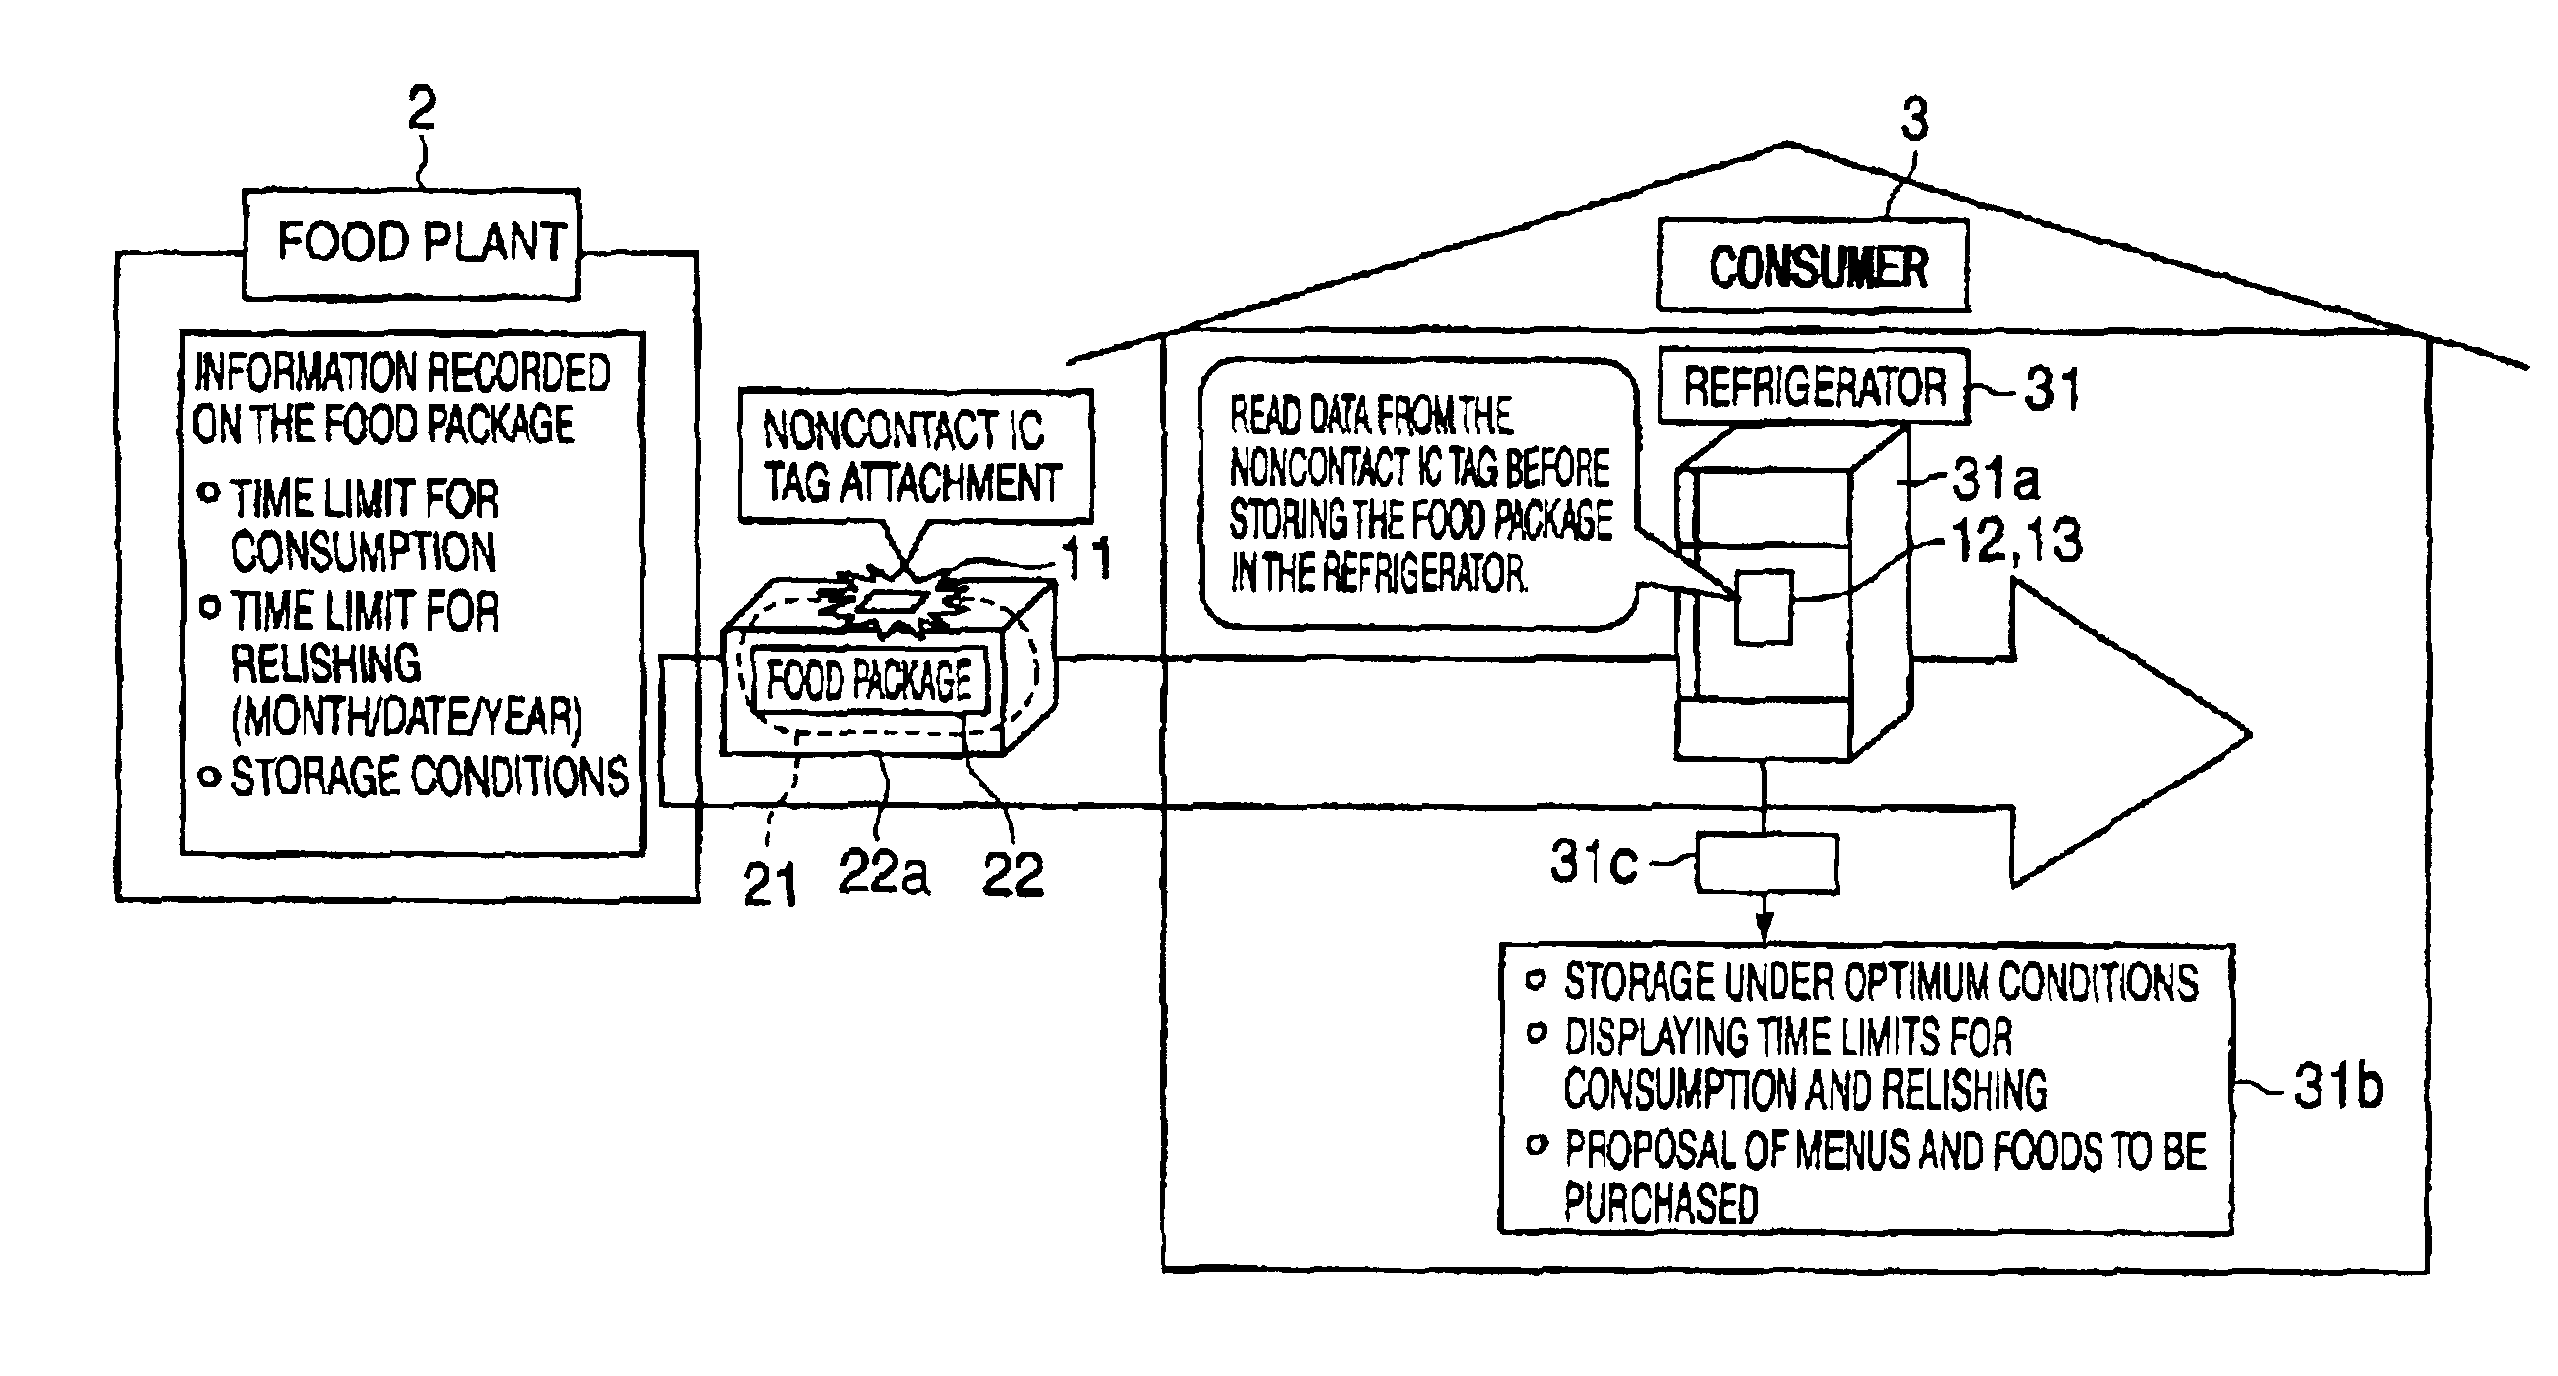 Automatic refrigerator system, refrigerator, automatic cooking system, and microwave oven